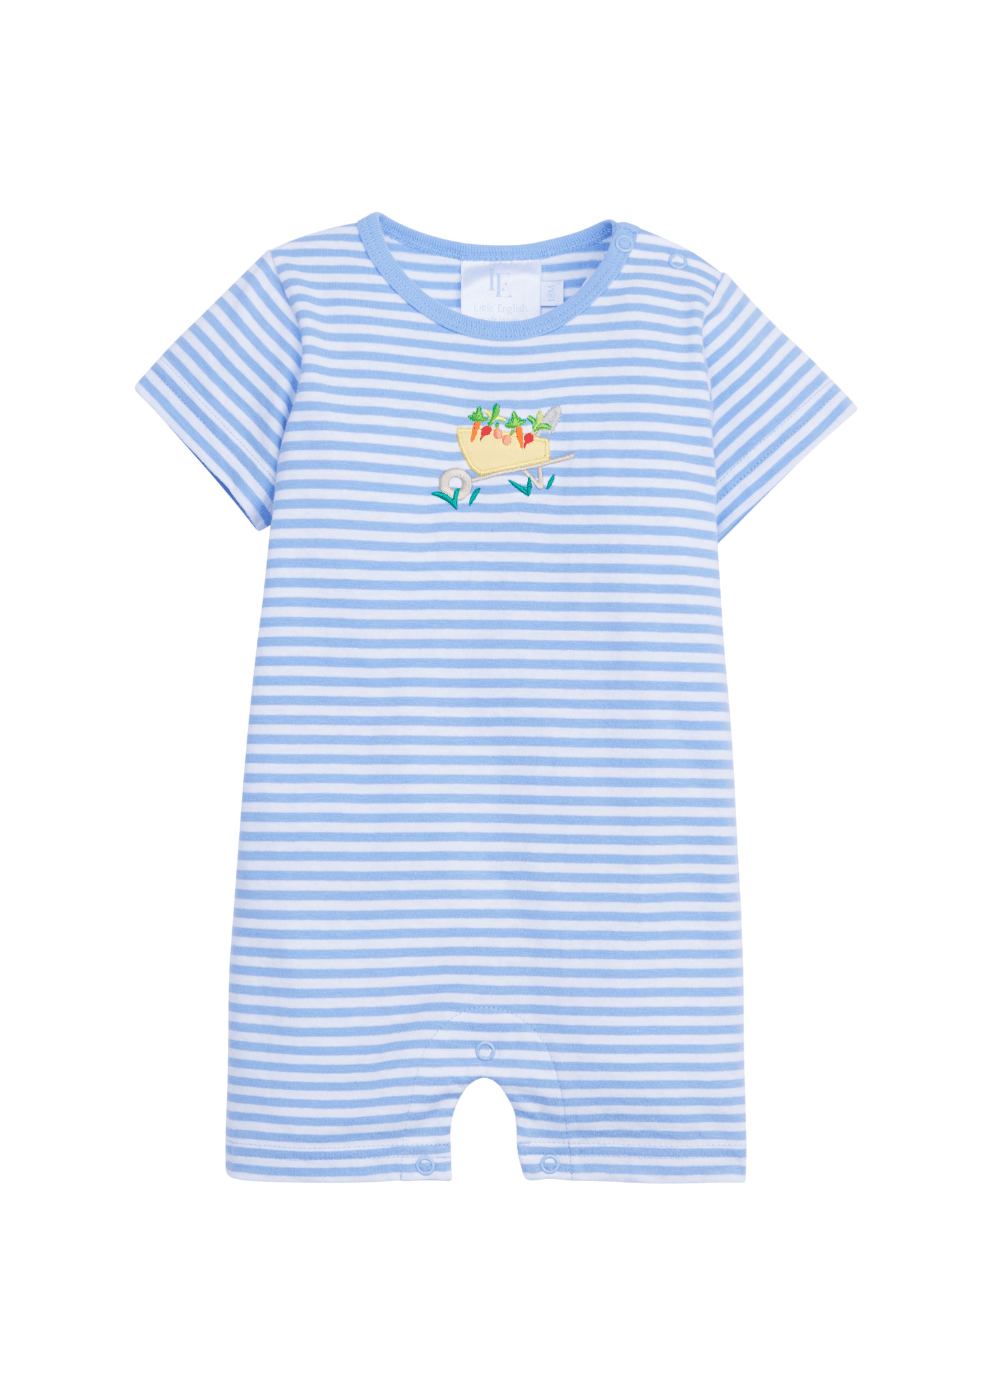 classic childrens clothing girls blue and white striped romper with wheelbarrow applique